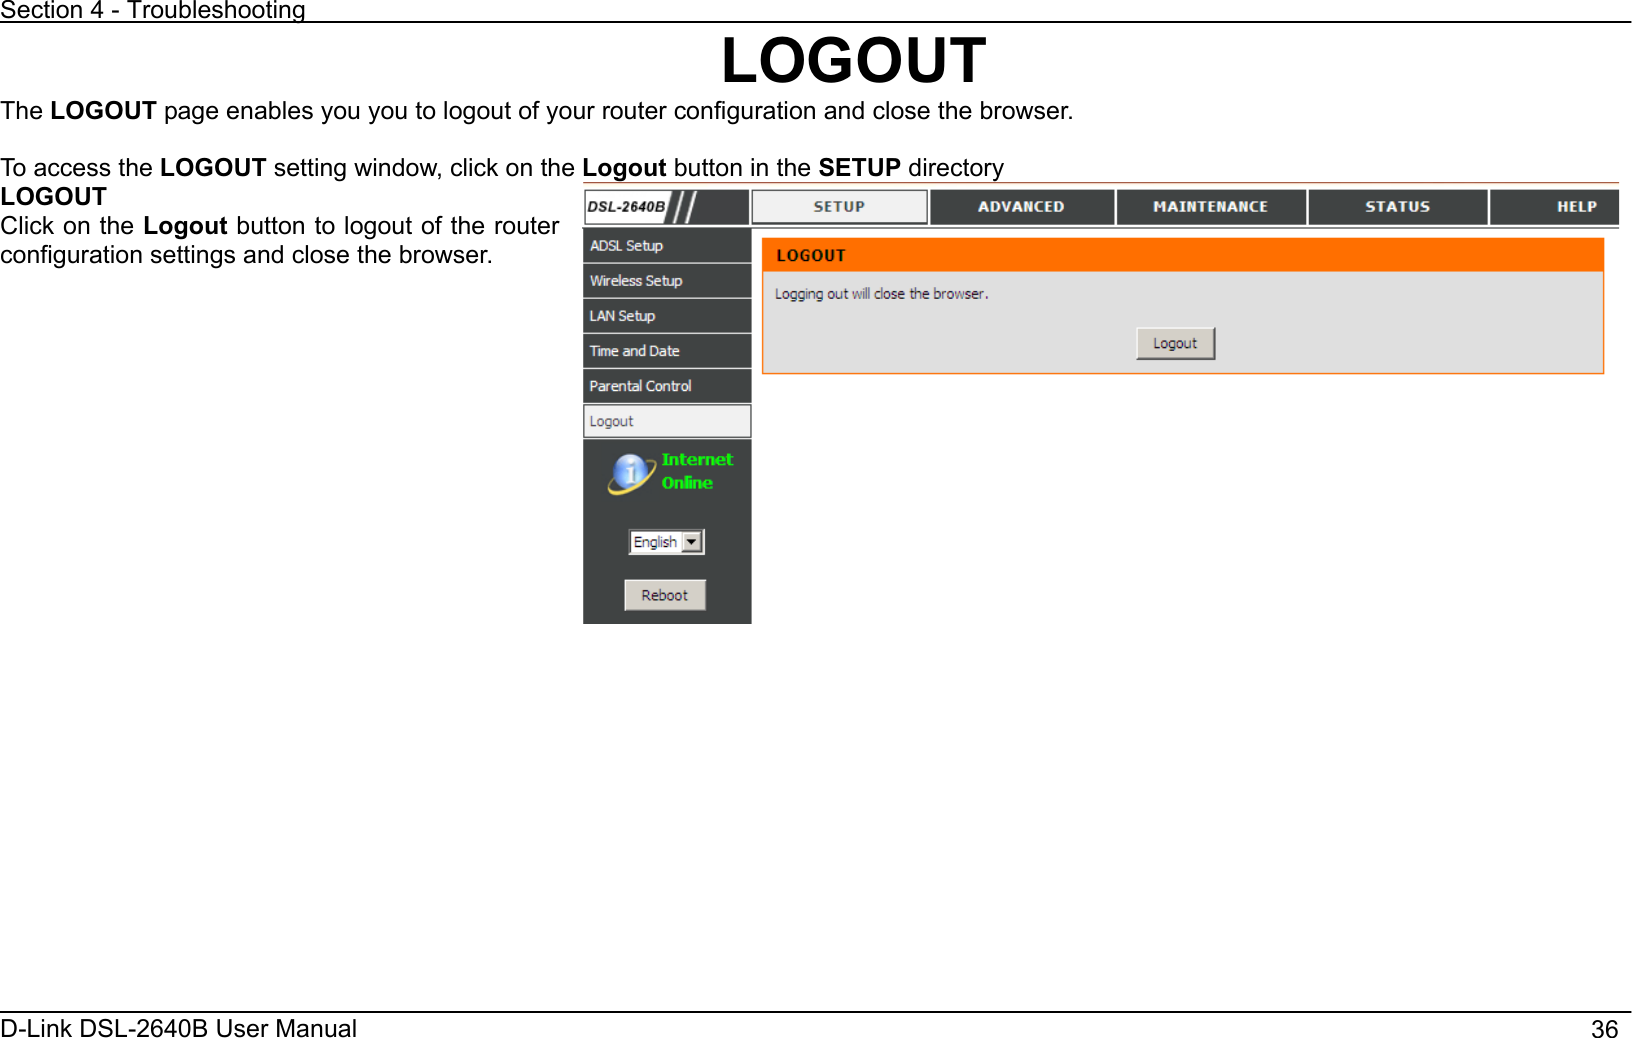 Section 4 - Troubleshooting D-Link DSL-2640B User Manual                                       36LOGOUTThe LOGOUT page enables you you to logout of your router configuration and close the browser. To access the LOGOUT setting window, click on the Logout button in the SETUP directory LOGOUTClick on the Logout button to logout of the router configuration settings and close the browser. 